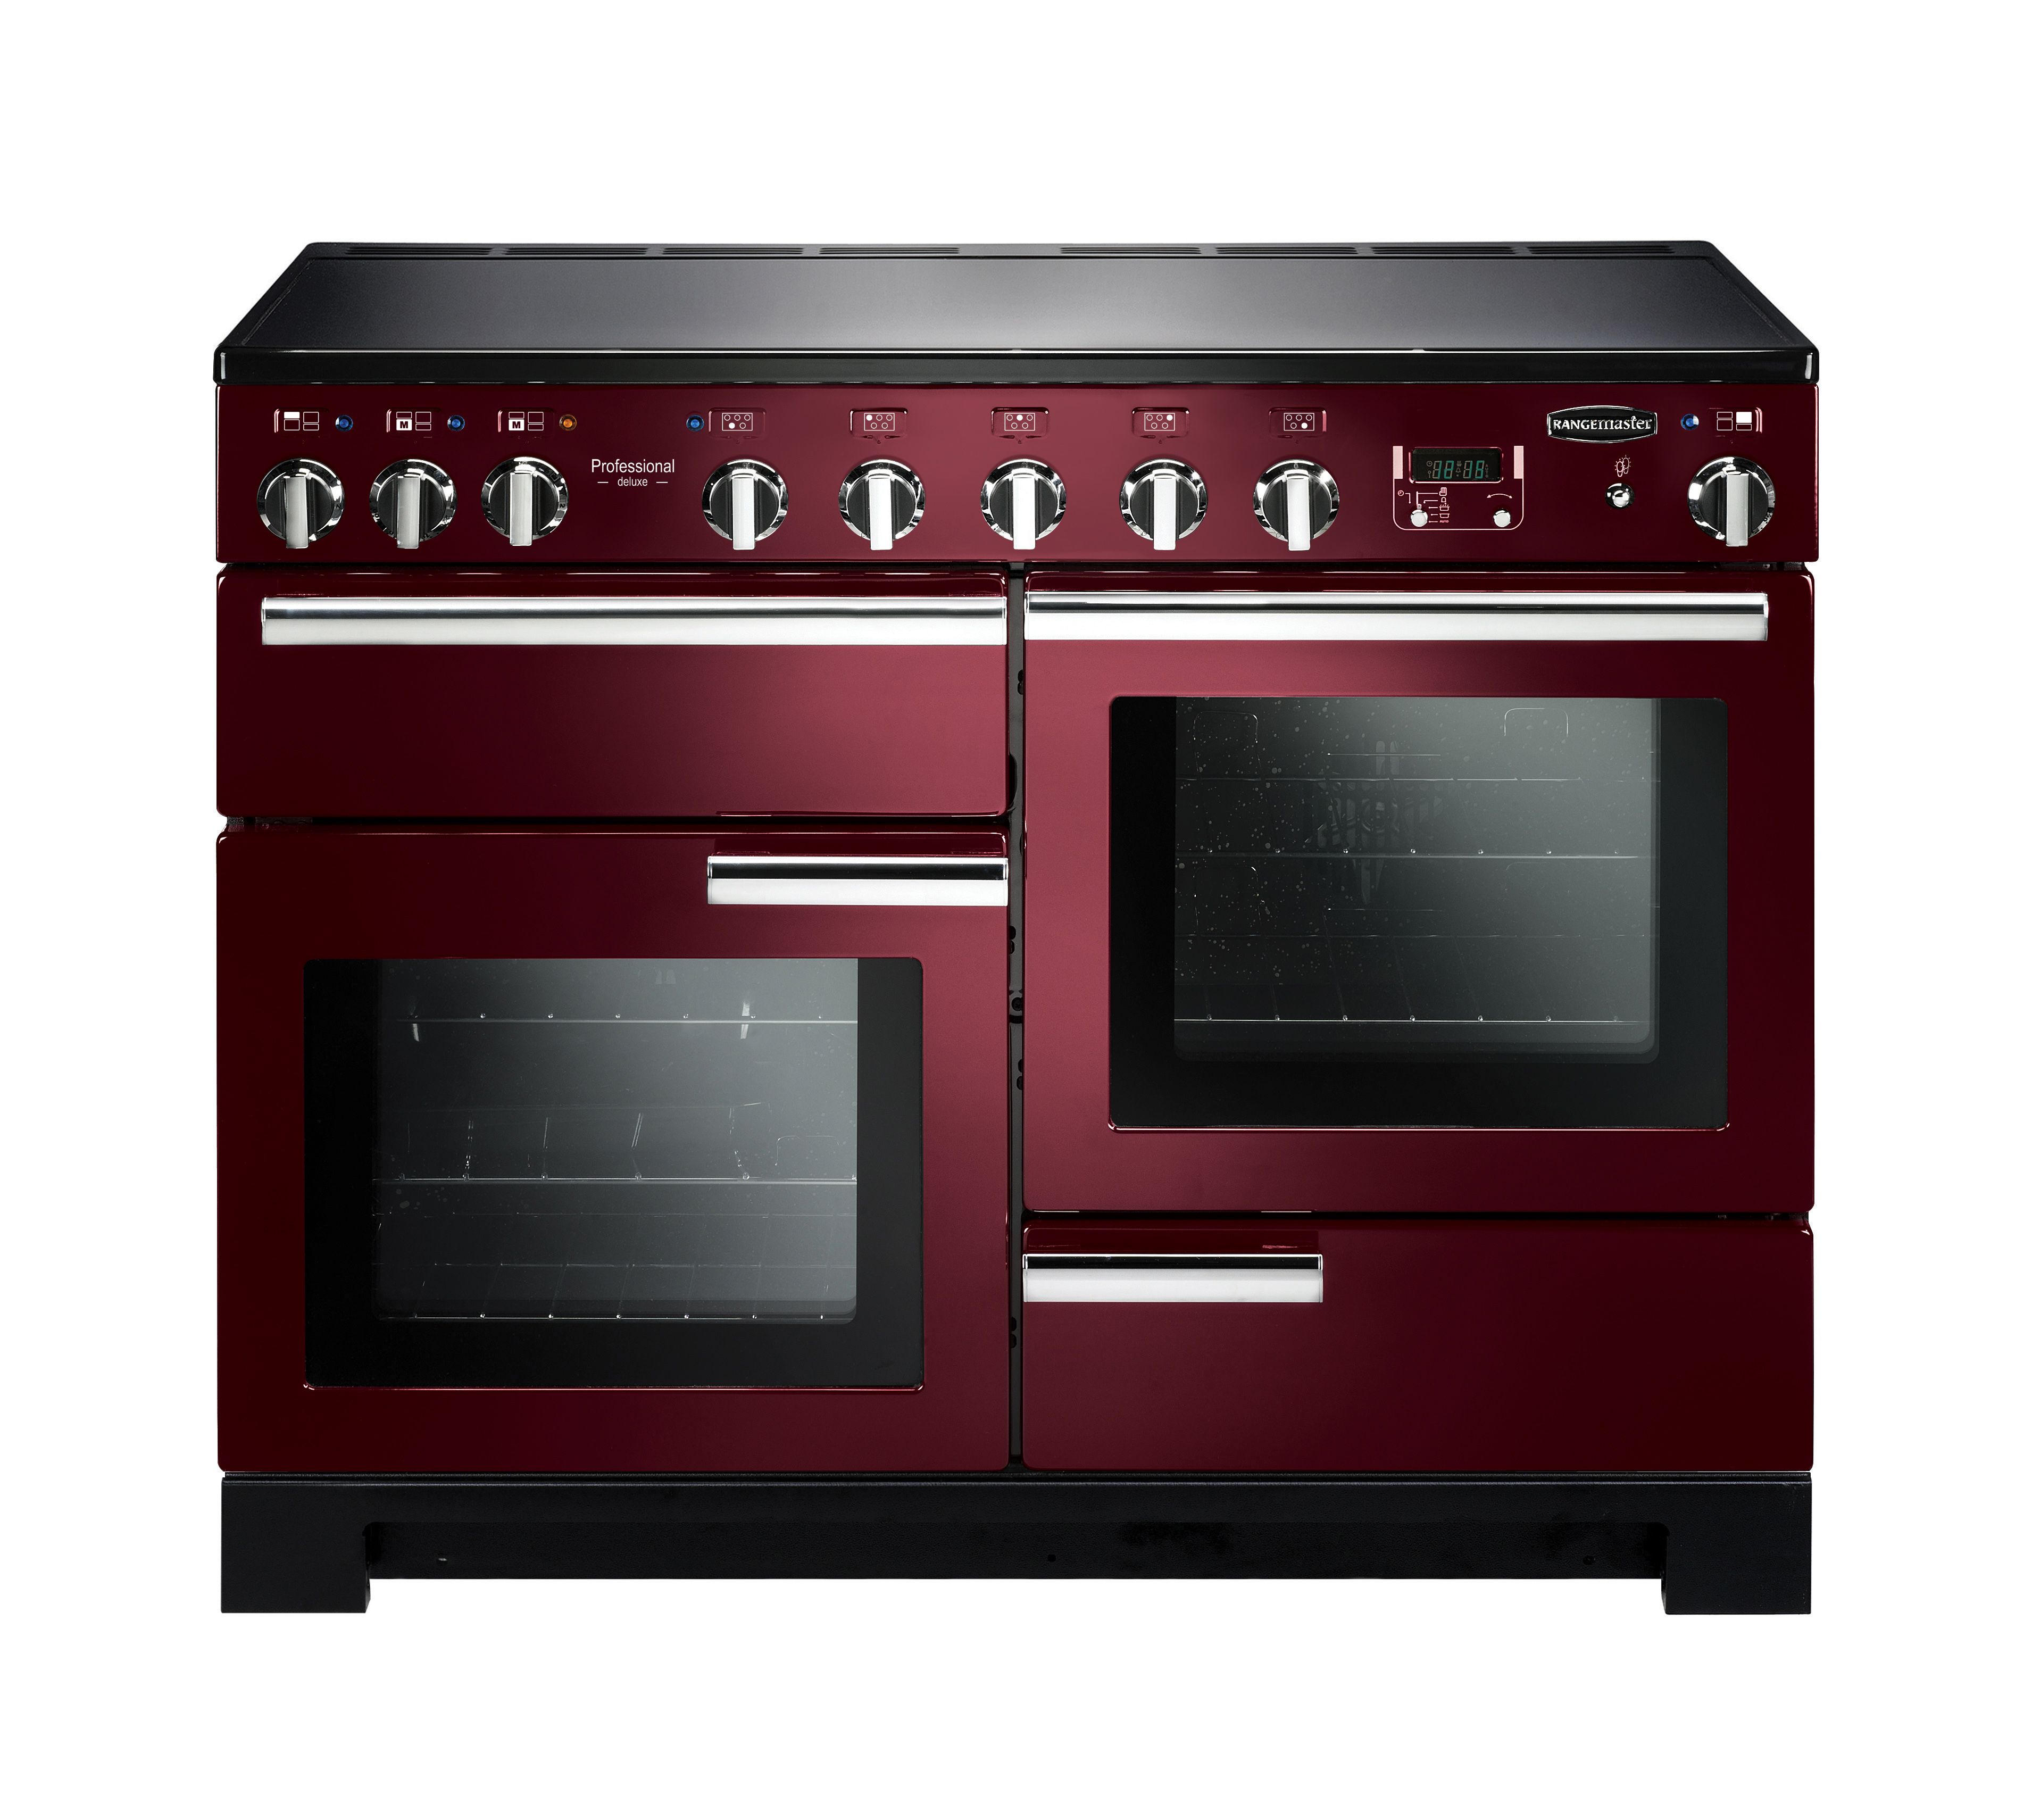 Rangemaster Professional Deluxe PDL110EICY/C 110cm Electric Range Cooker with Induction Hob - Cranberry / Chrome - A/A Rated, Red